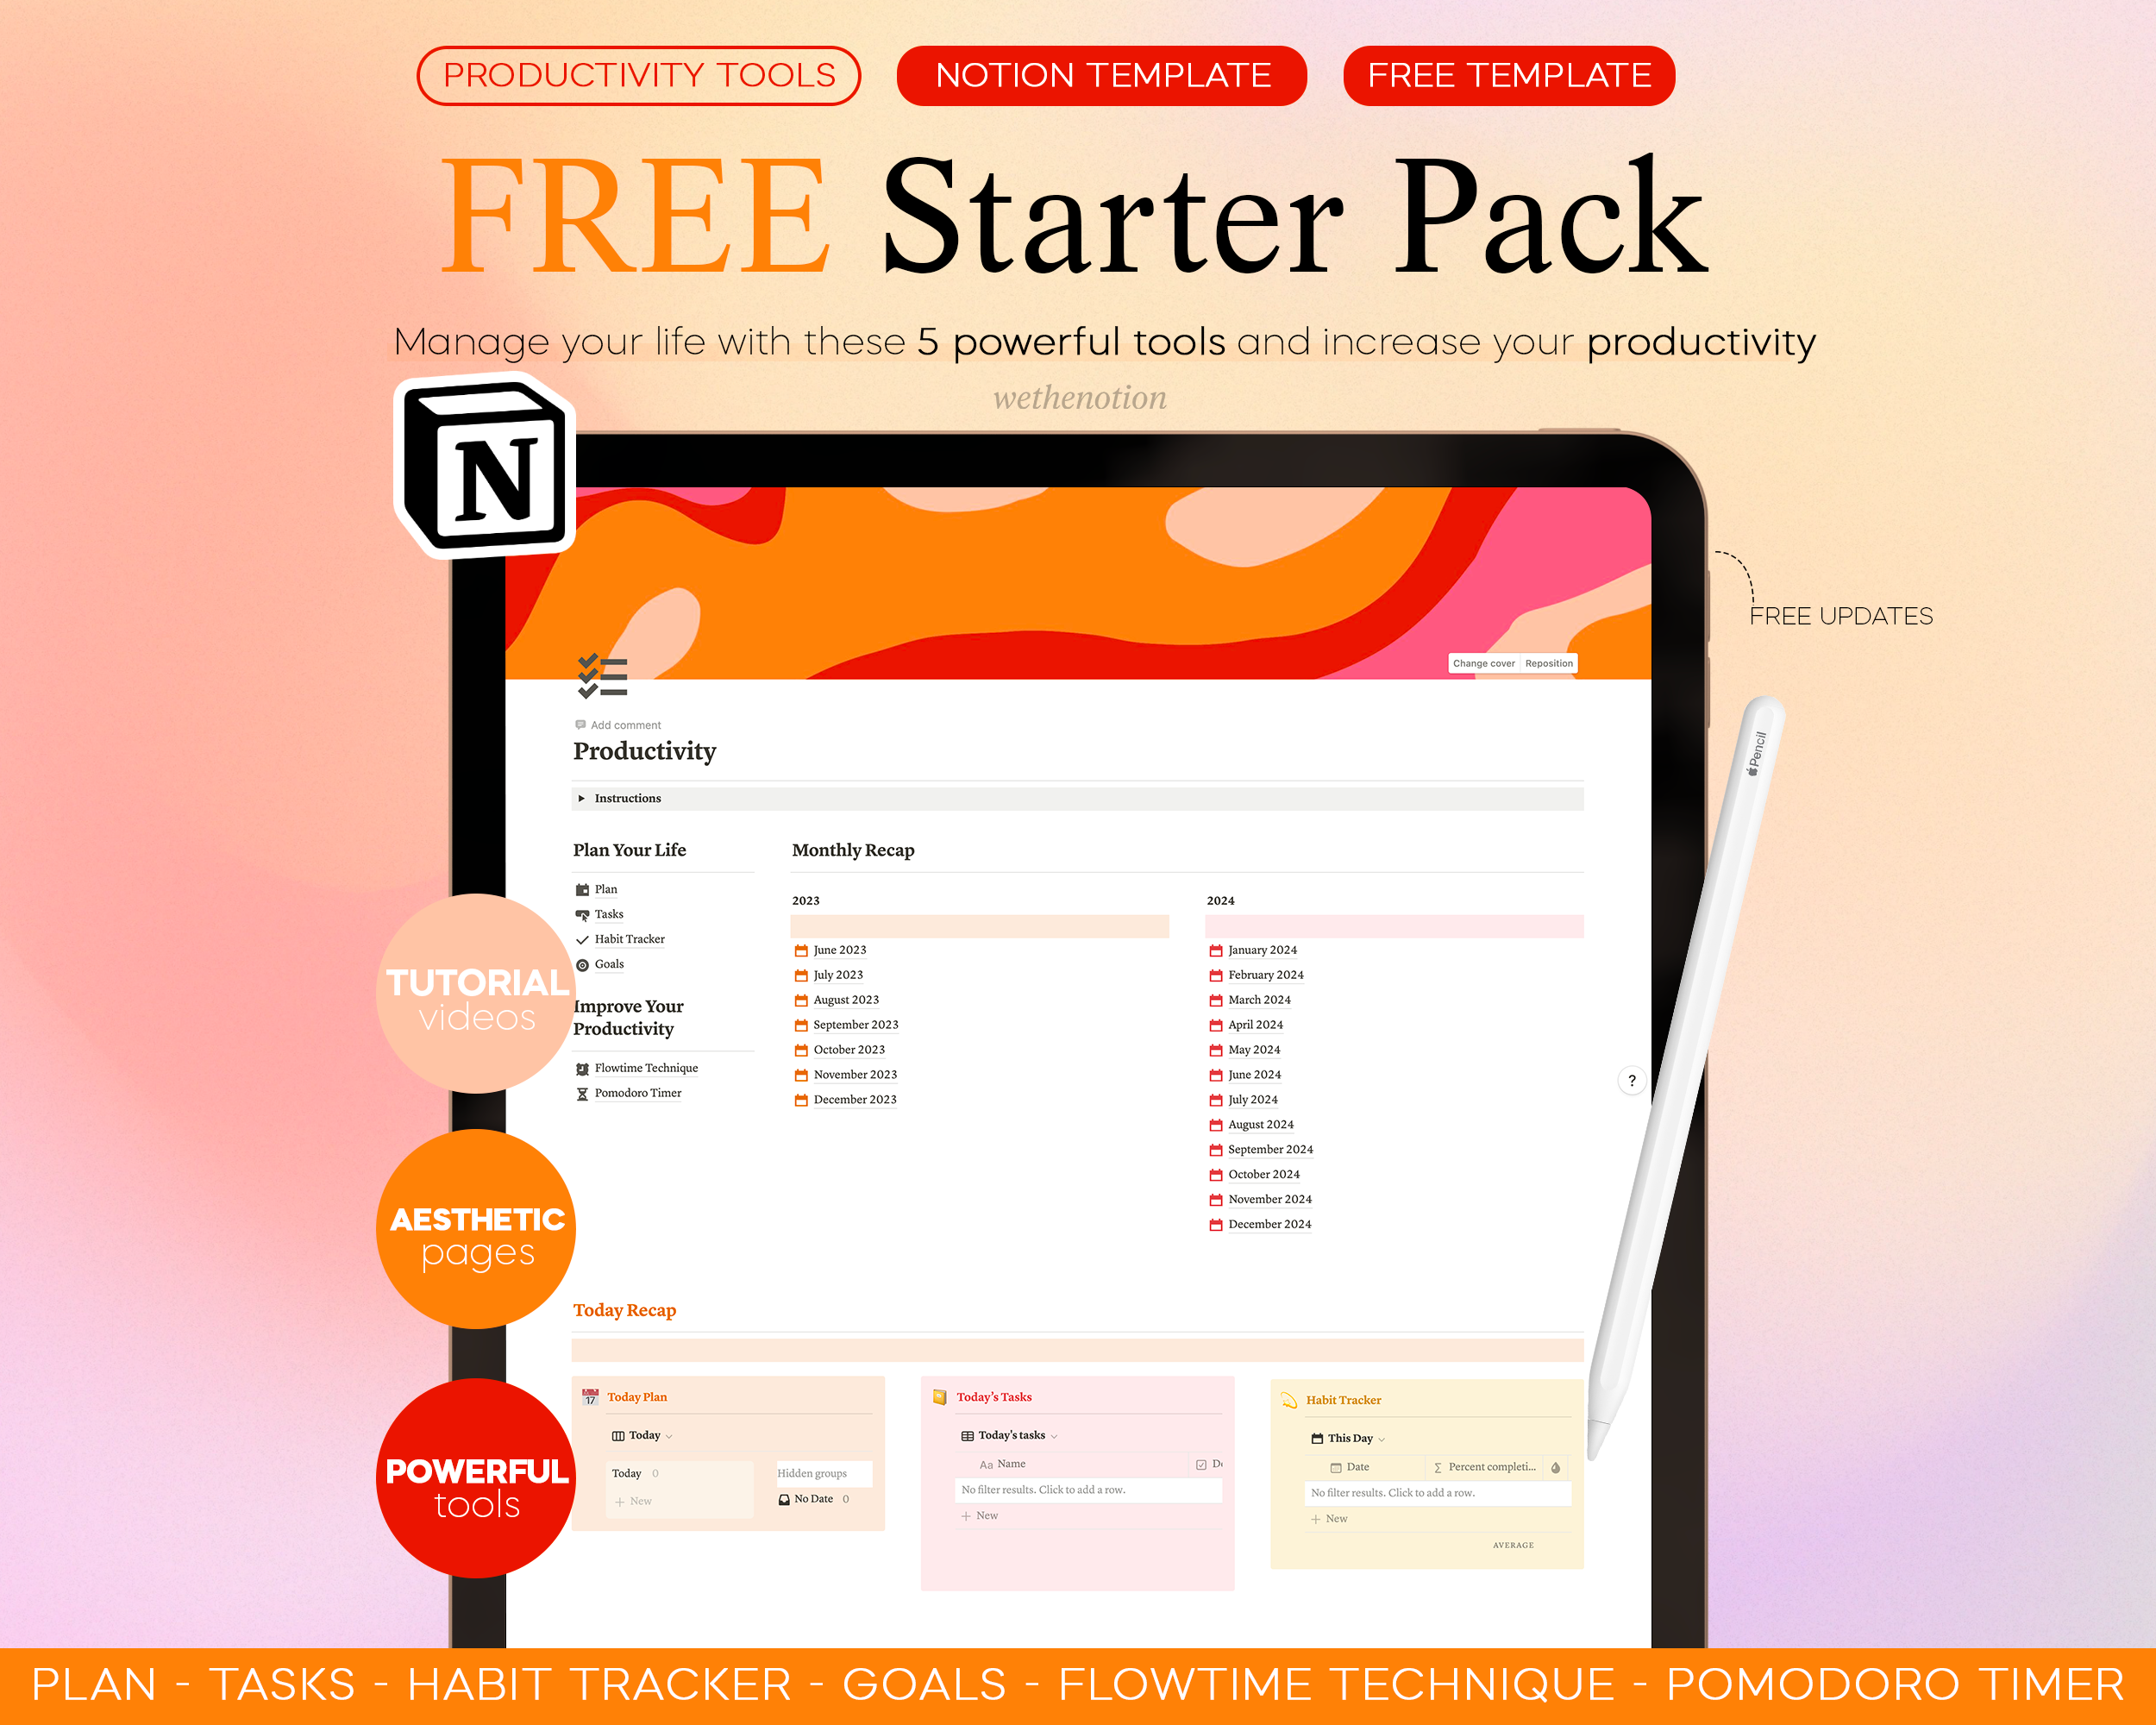 Free Starter Pack (5 tools)